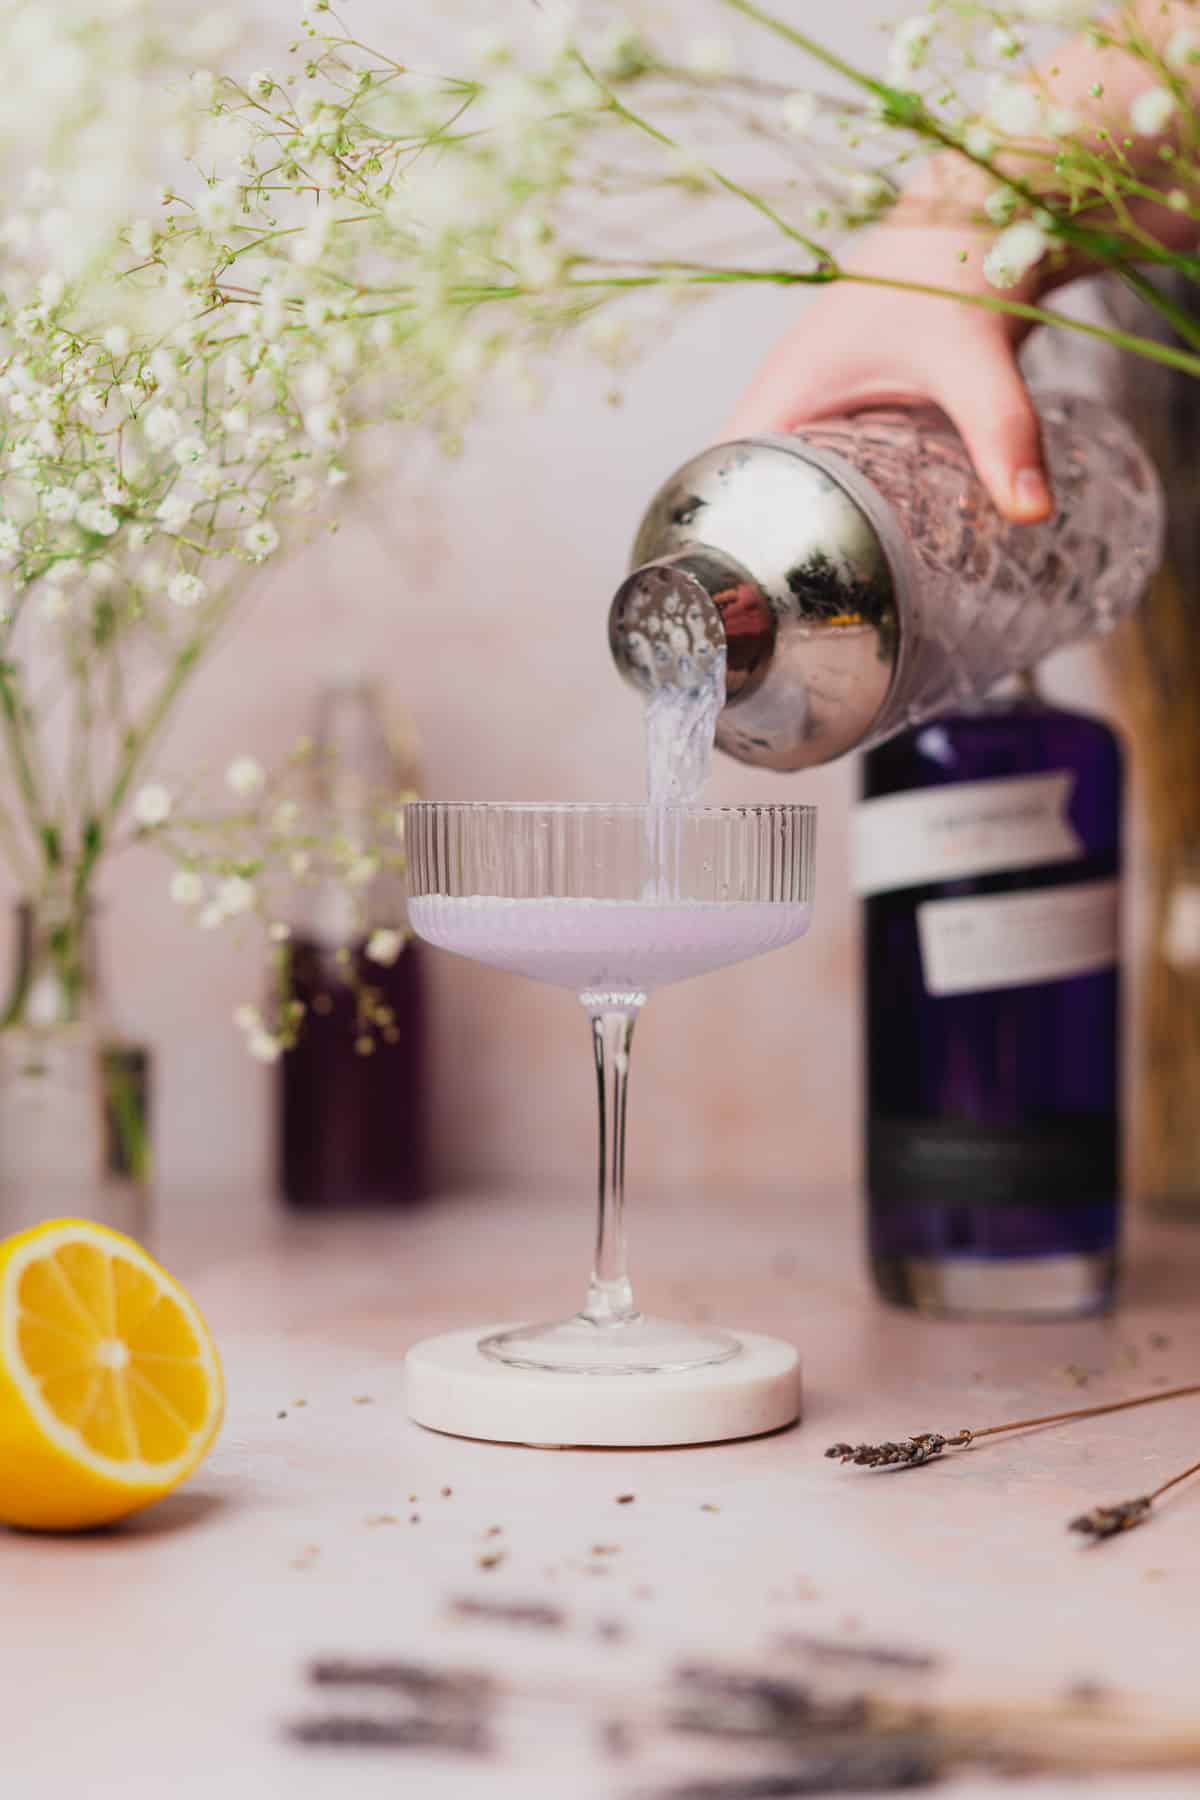 straining lavender gin cocktail from shaker into a coupe glass 